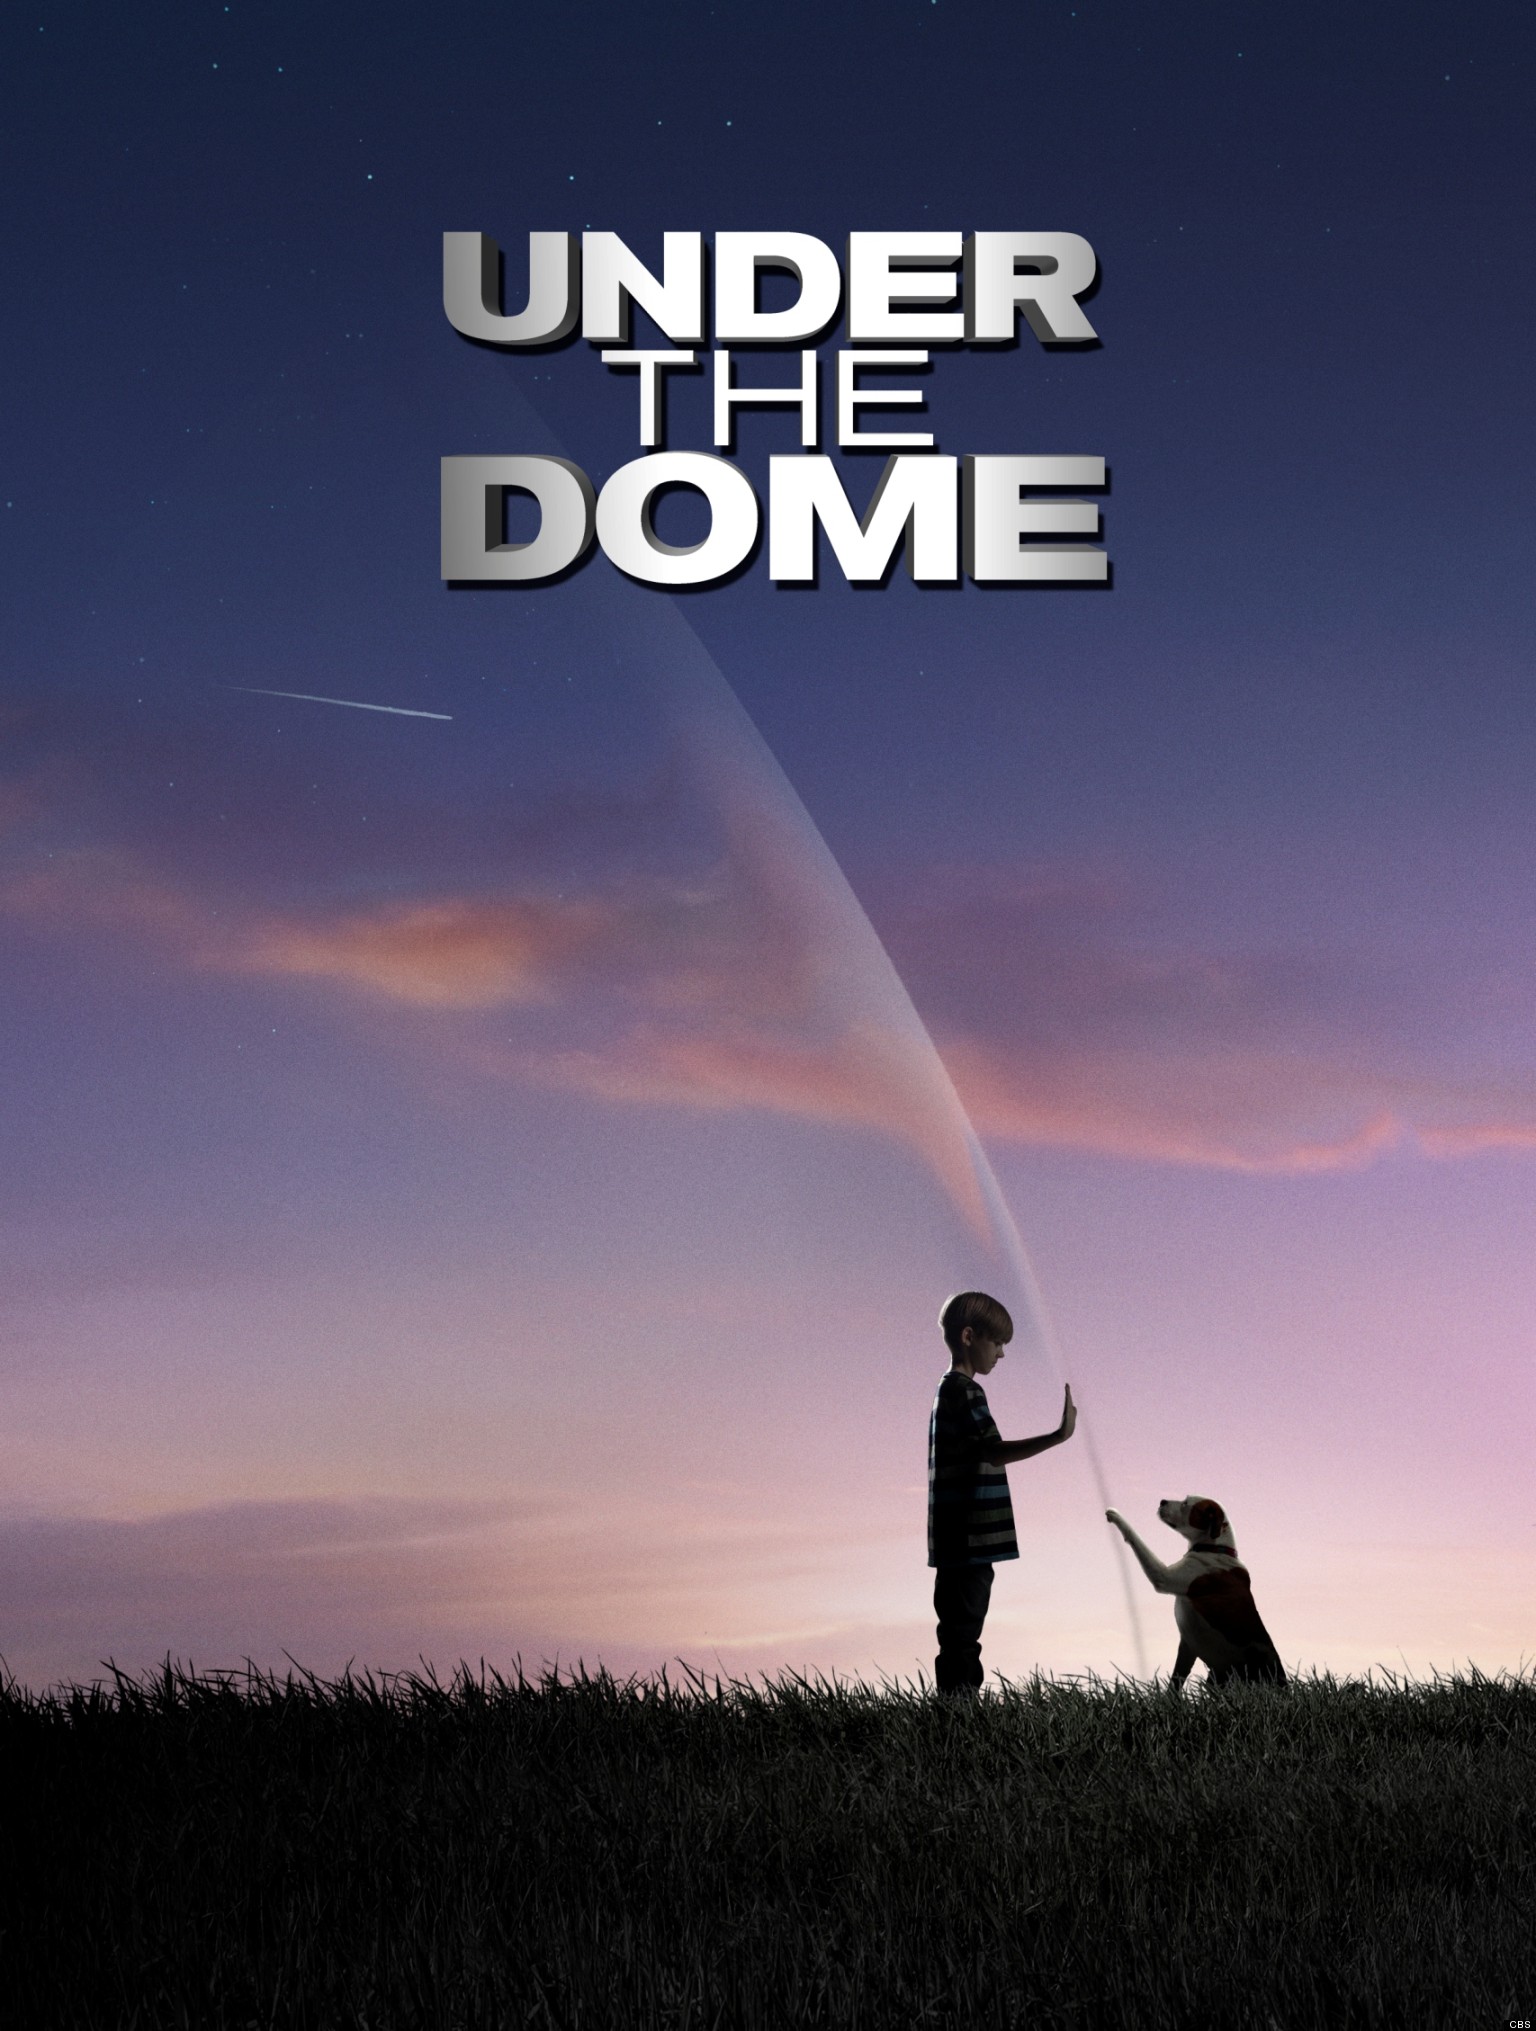 <i>Under the Dome</i> season 1 episode 7 titled “Imperfect Signals” will air Monday at 10:00 - 11:00PM ET/PT) on CBS. <a href=http://www.cbs.com/shows/under-the-dome/video/><font color=blue>Click here to watch the live stream broadcast on CBS.com.</font></a>